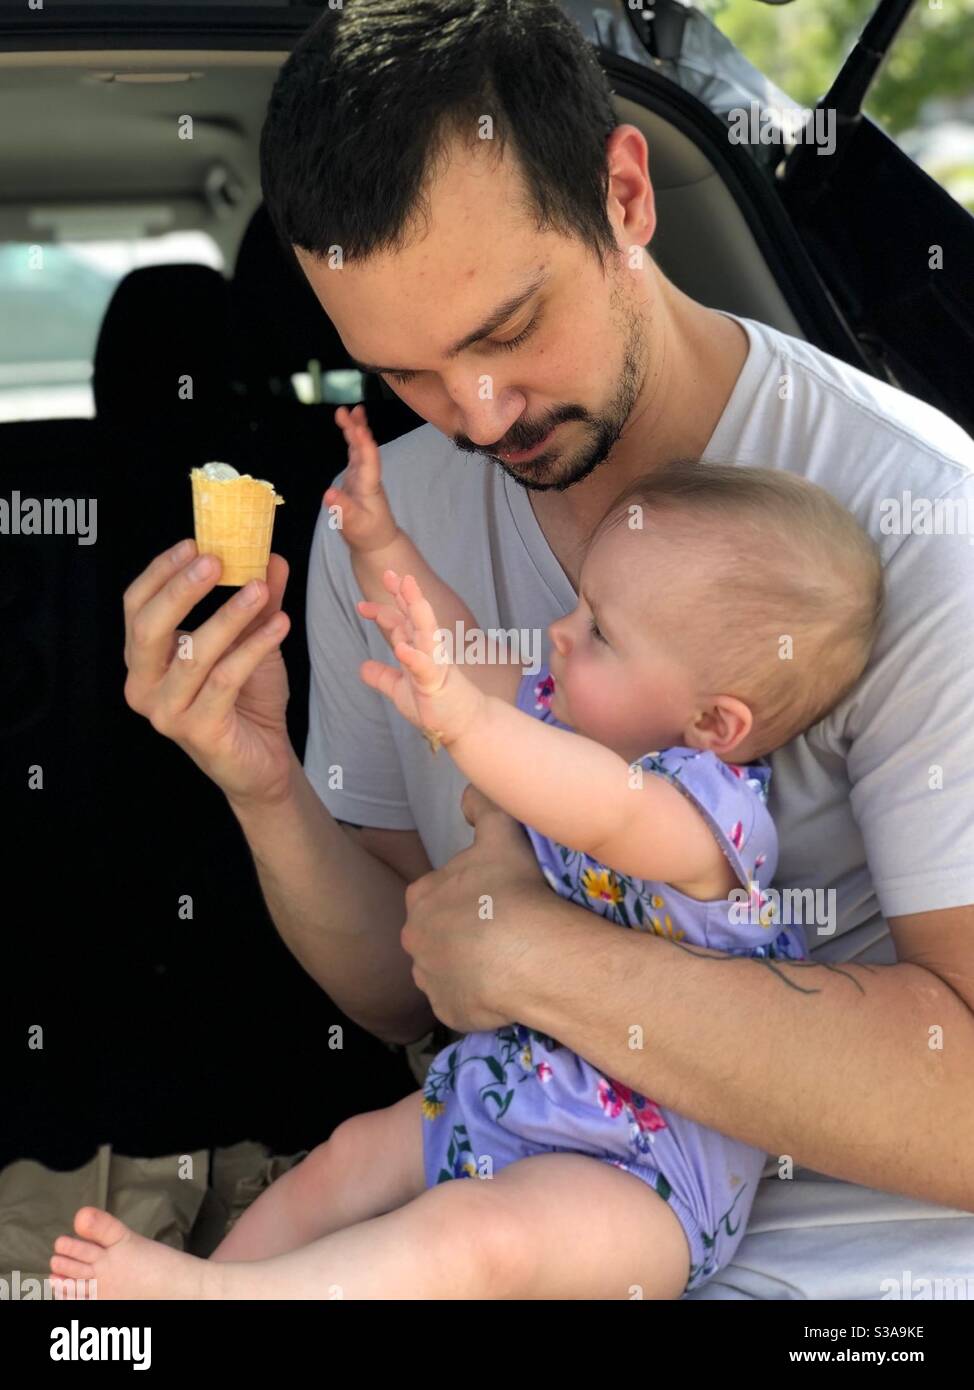 Baby reaching for Dad’s ice cream cone. Stock Photo